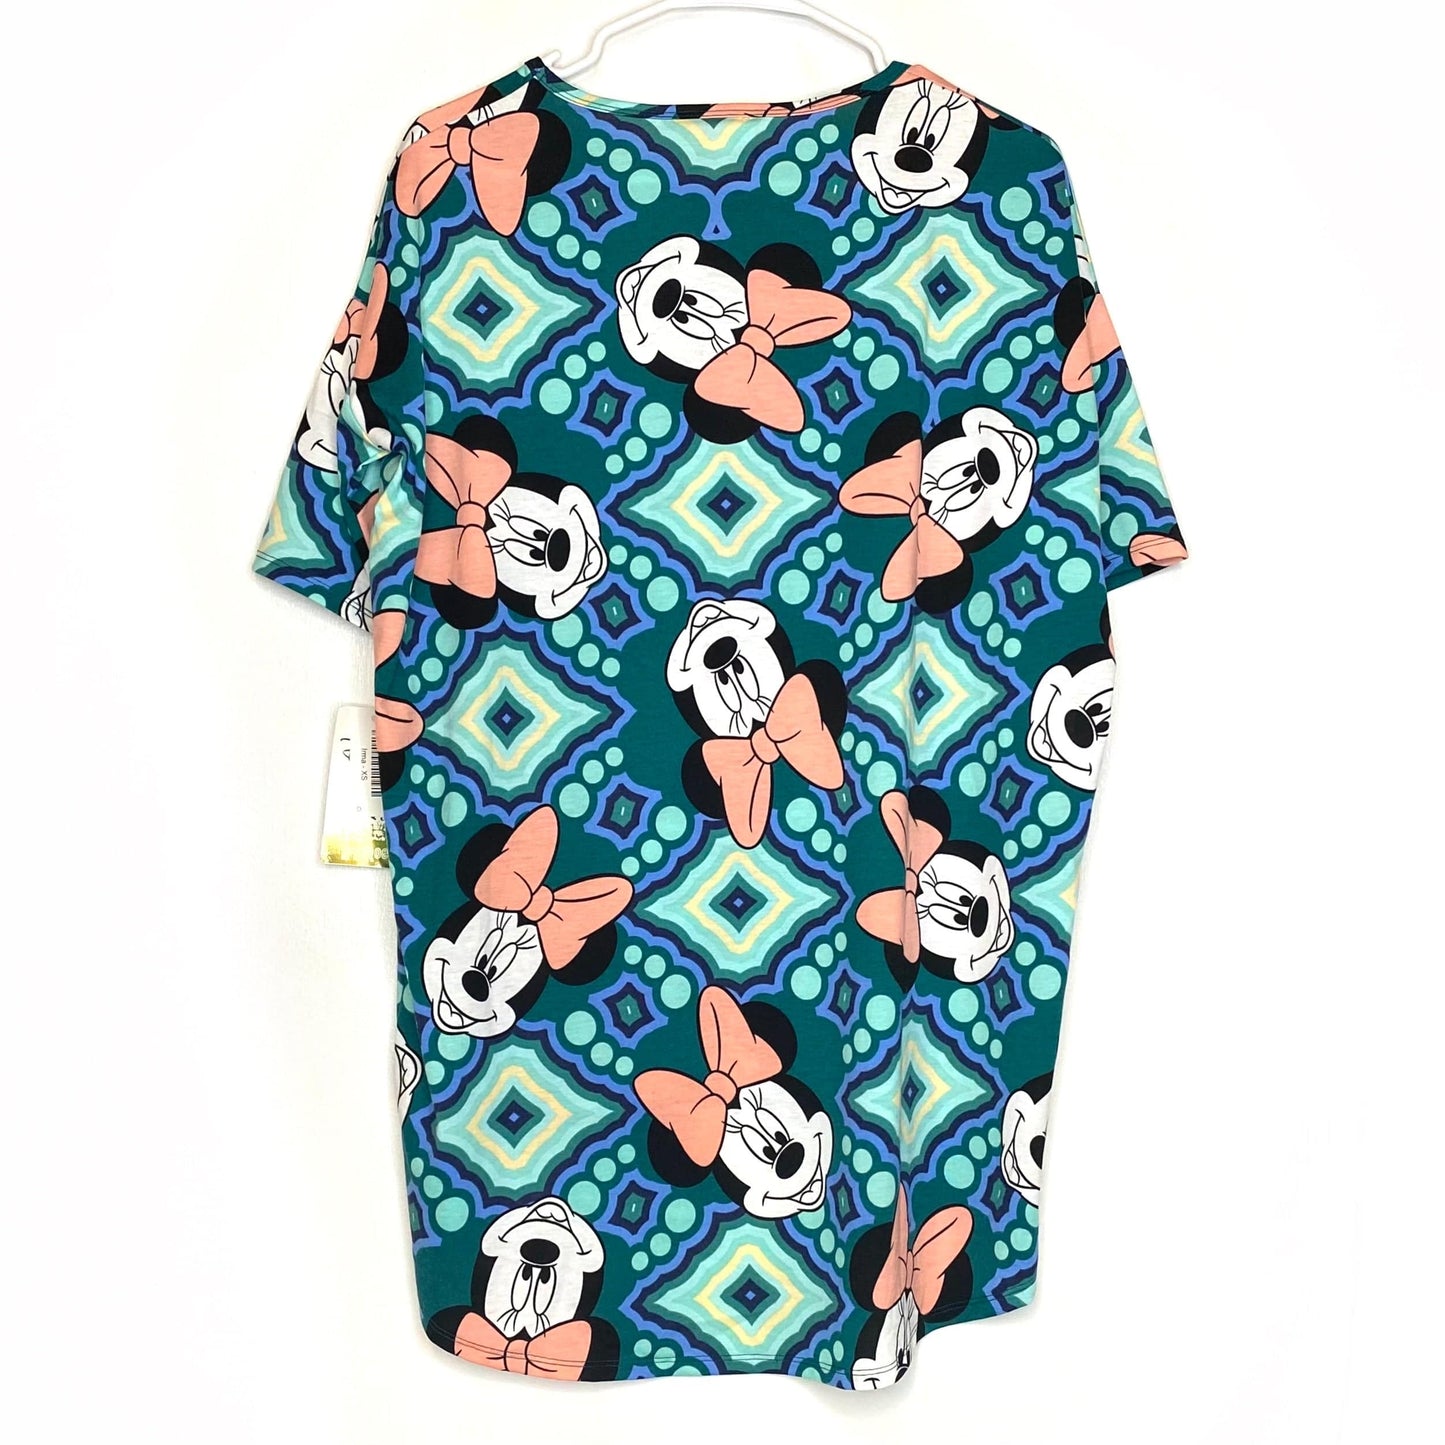 LuLaRoe Womens Size XS Blue/Green ‘Minnie Mouse’ Irma Graphic S/s Top NWT